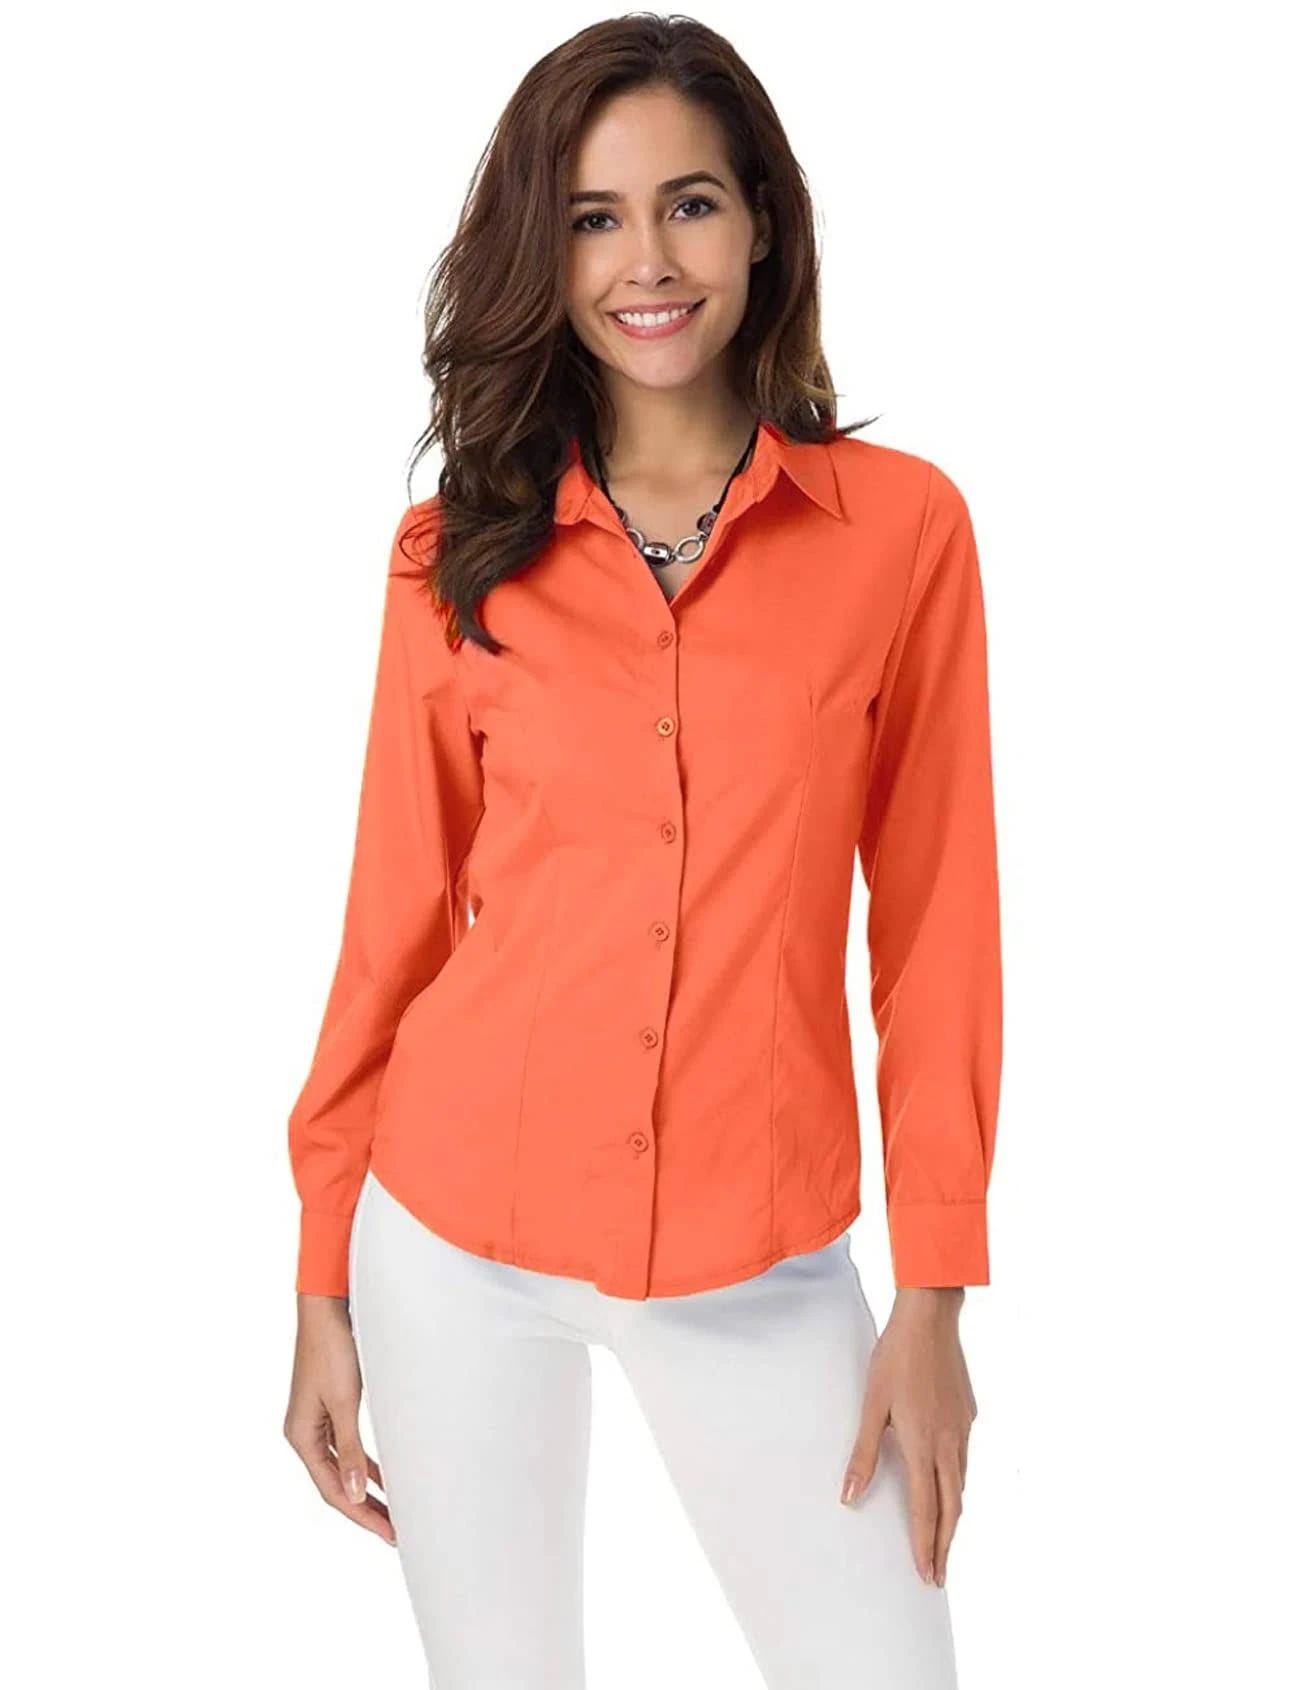 Elegant Orange Slim Fit Button-Down Shirt for Casual or Professional Wear | Image